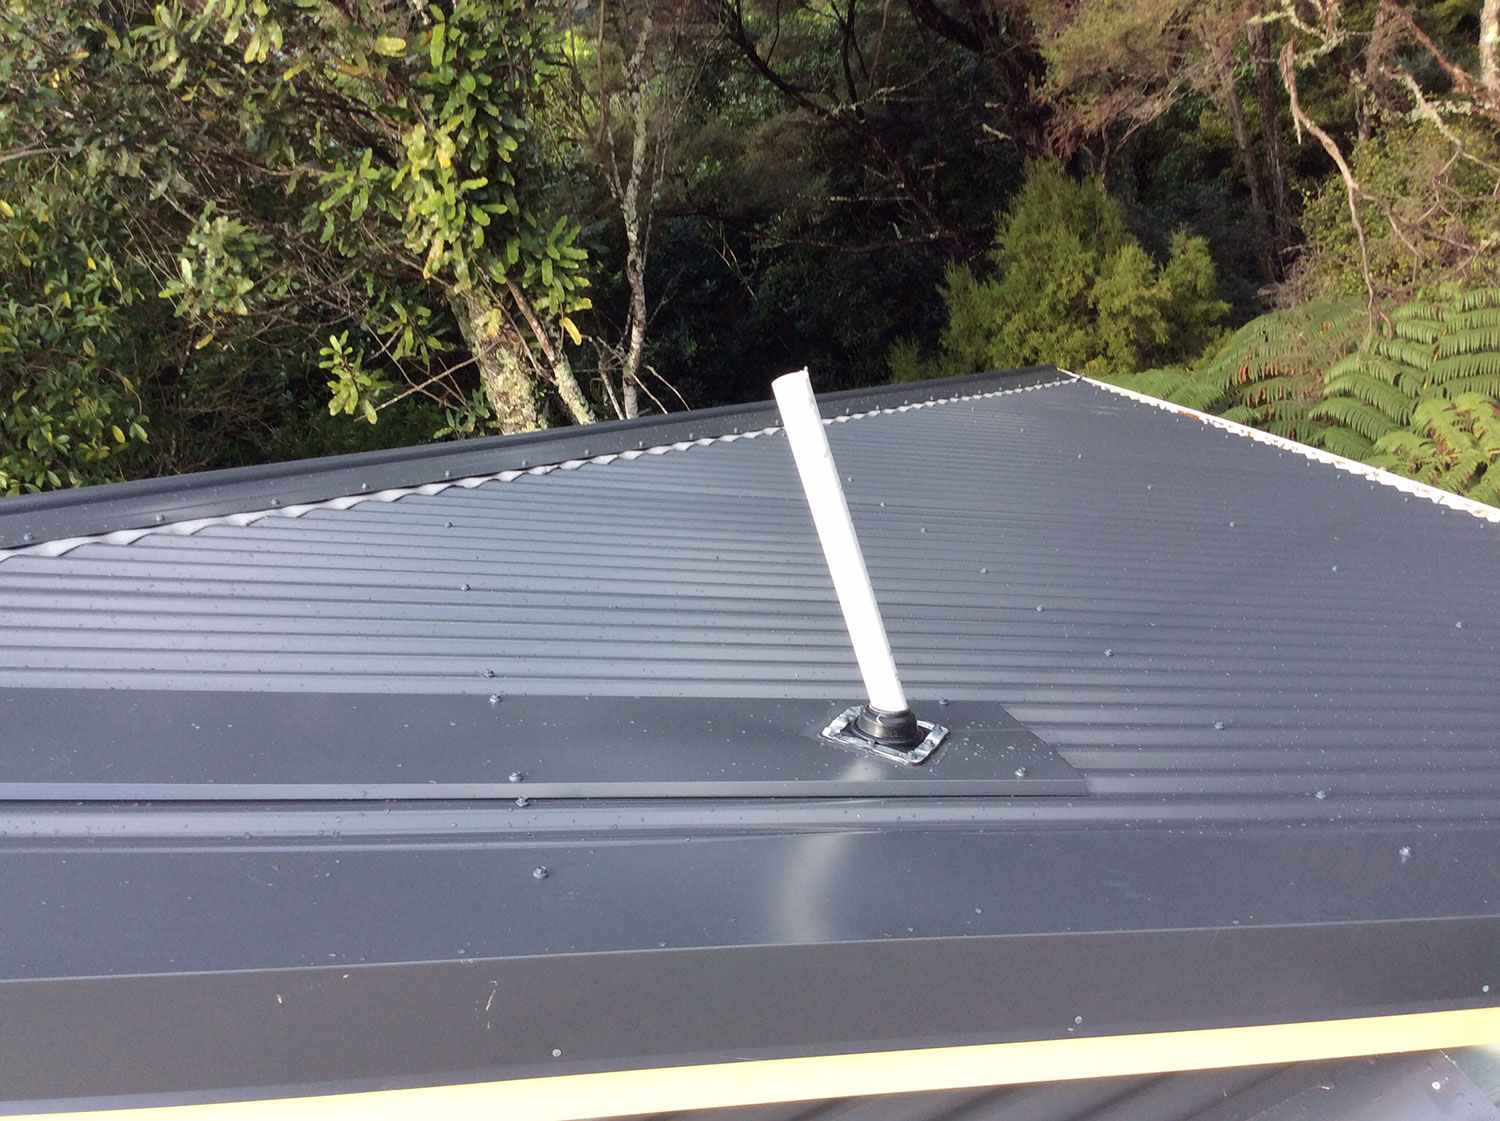 auckland roofing solutions services auckland and new zealand wide new roofs repair cladding and more Project gallery 81